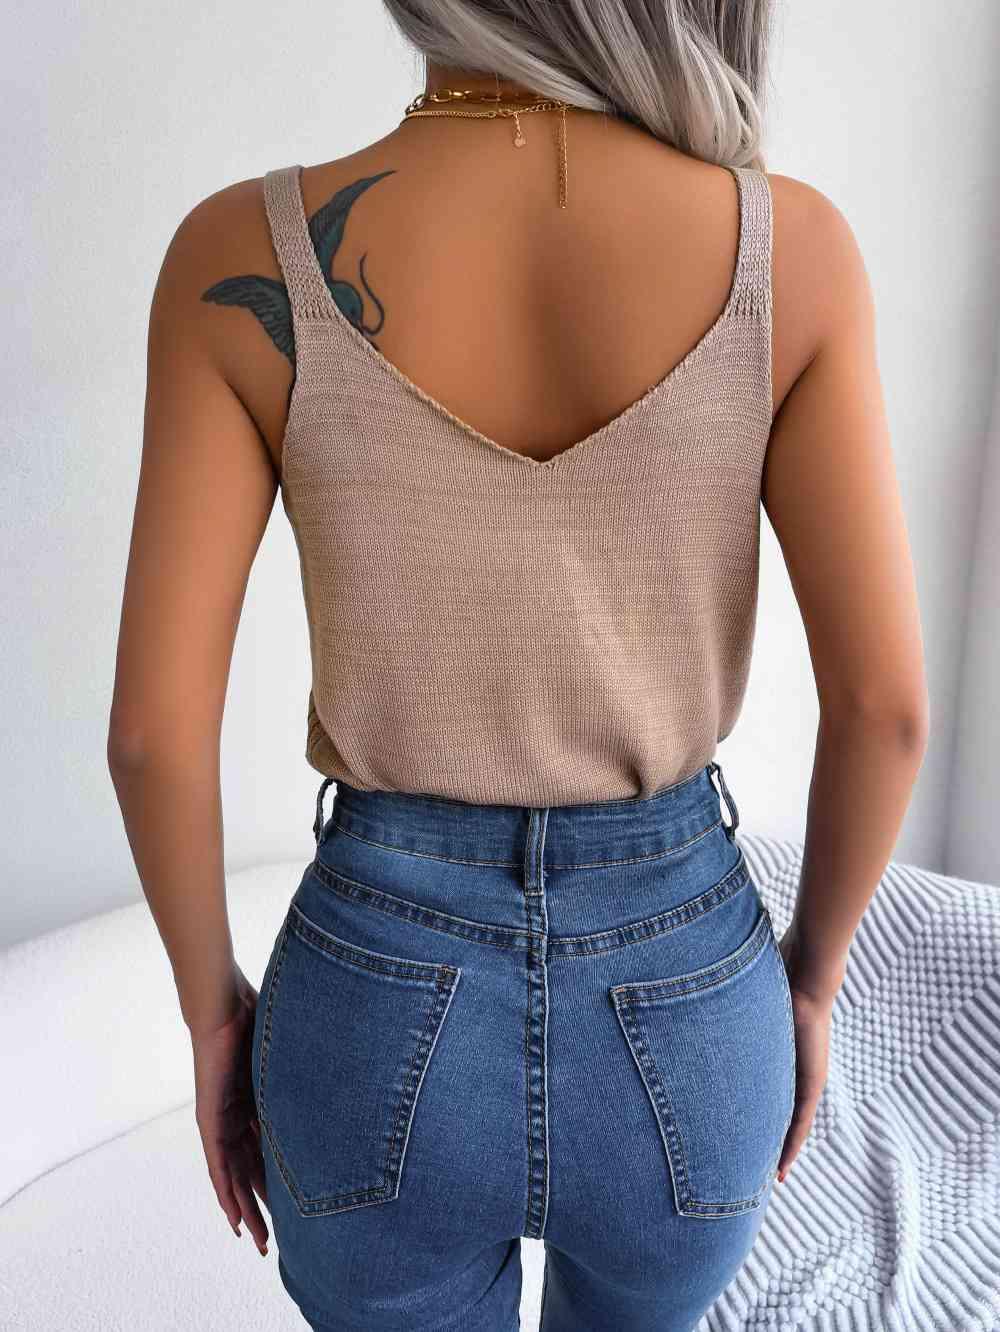 a woman with grey hair wearing jeans and a tank top